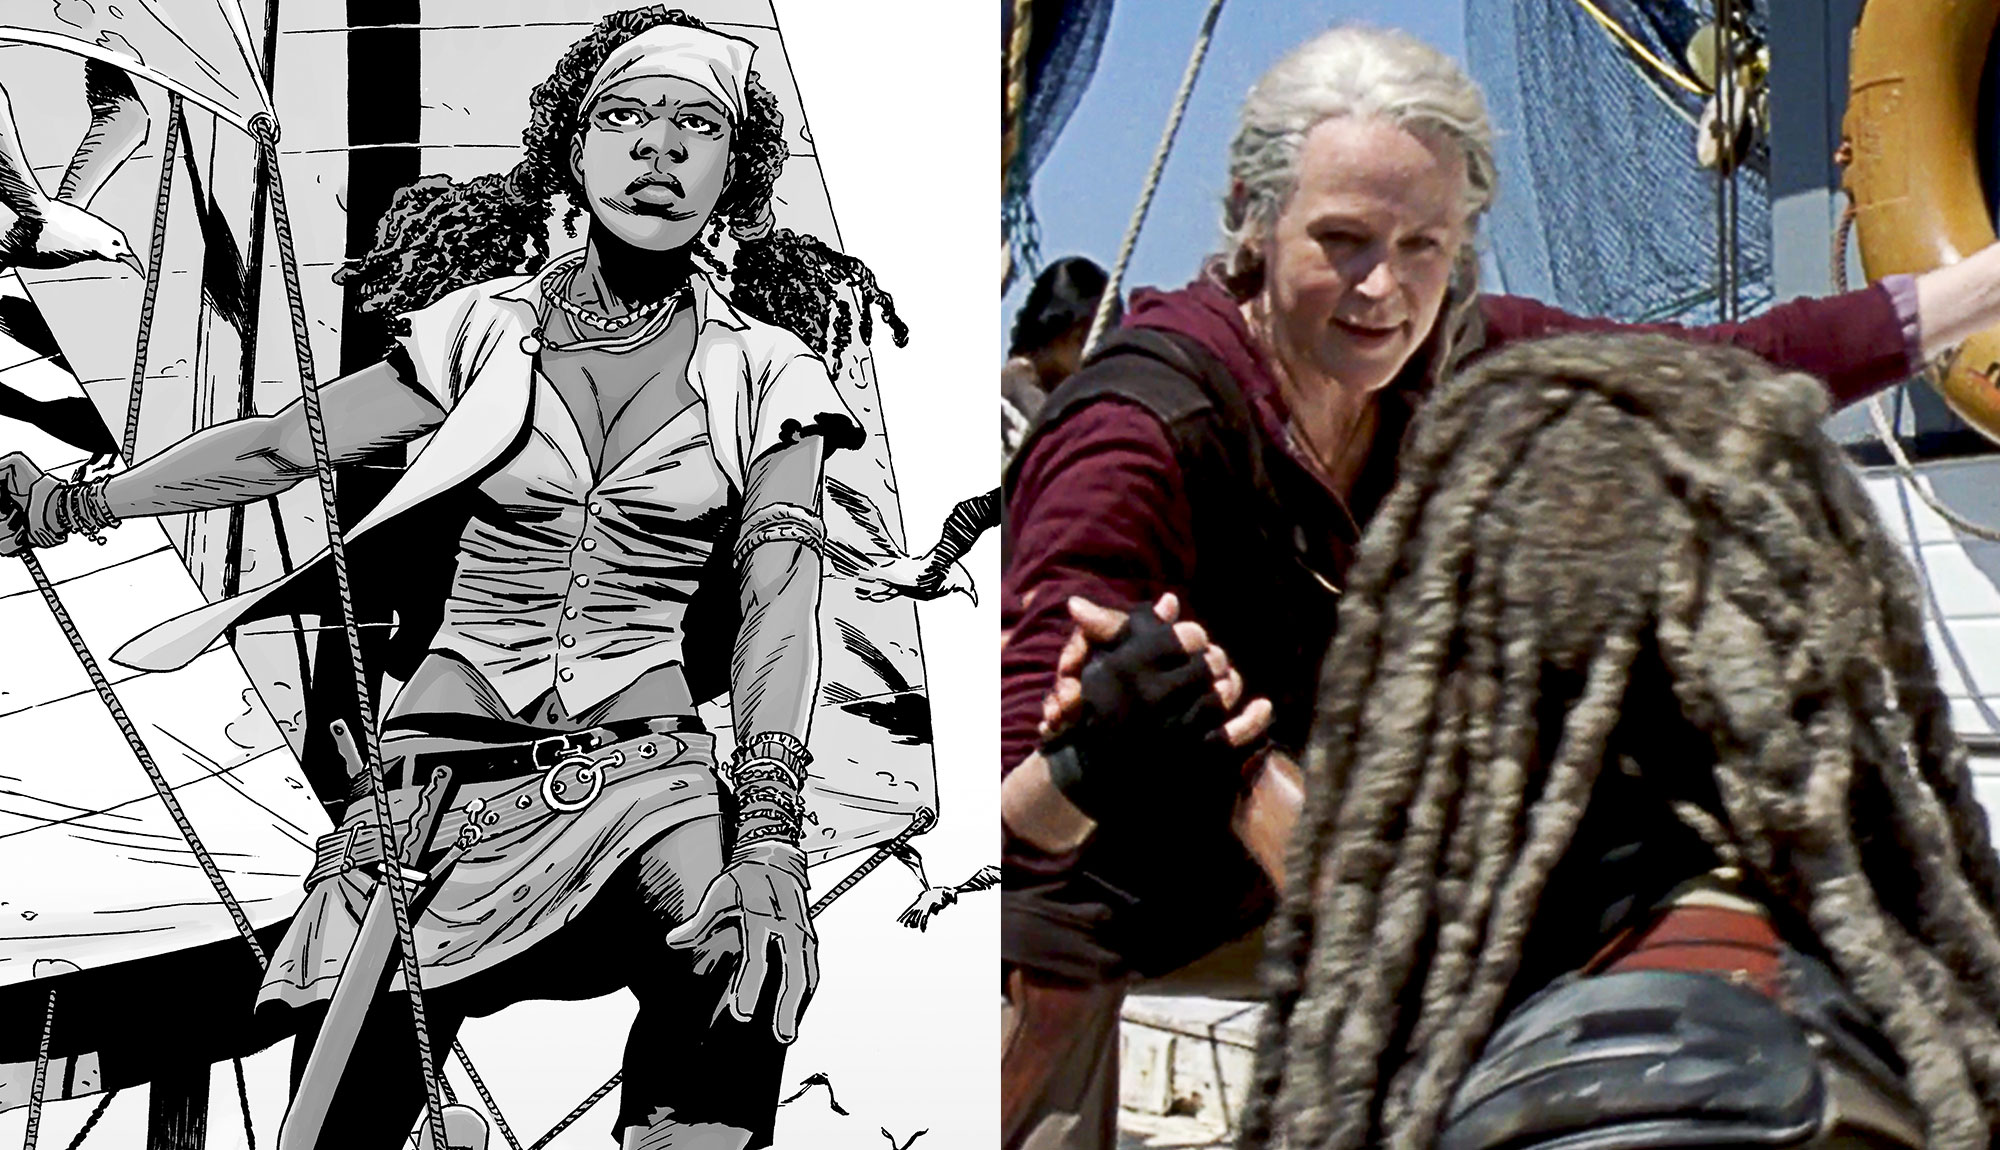 Panel to Screen: The Walking Dead Episode 1001 vs The Comics!